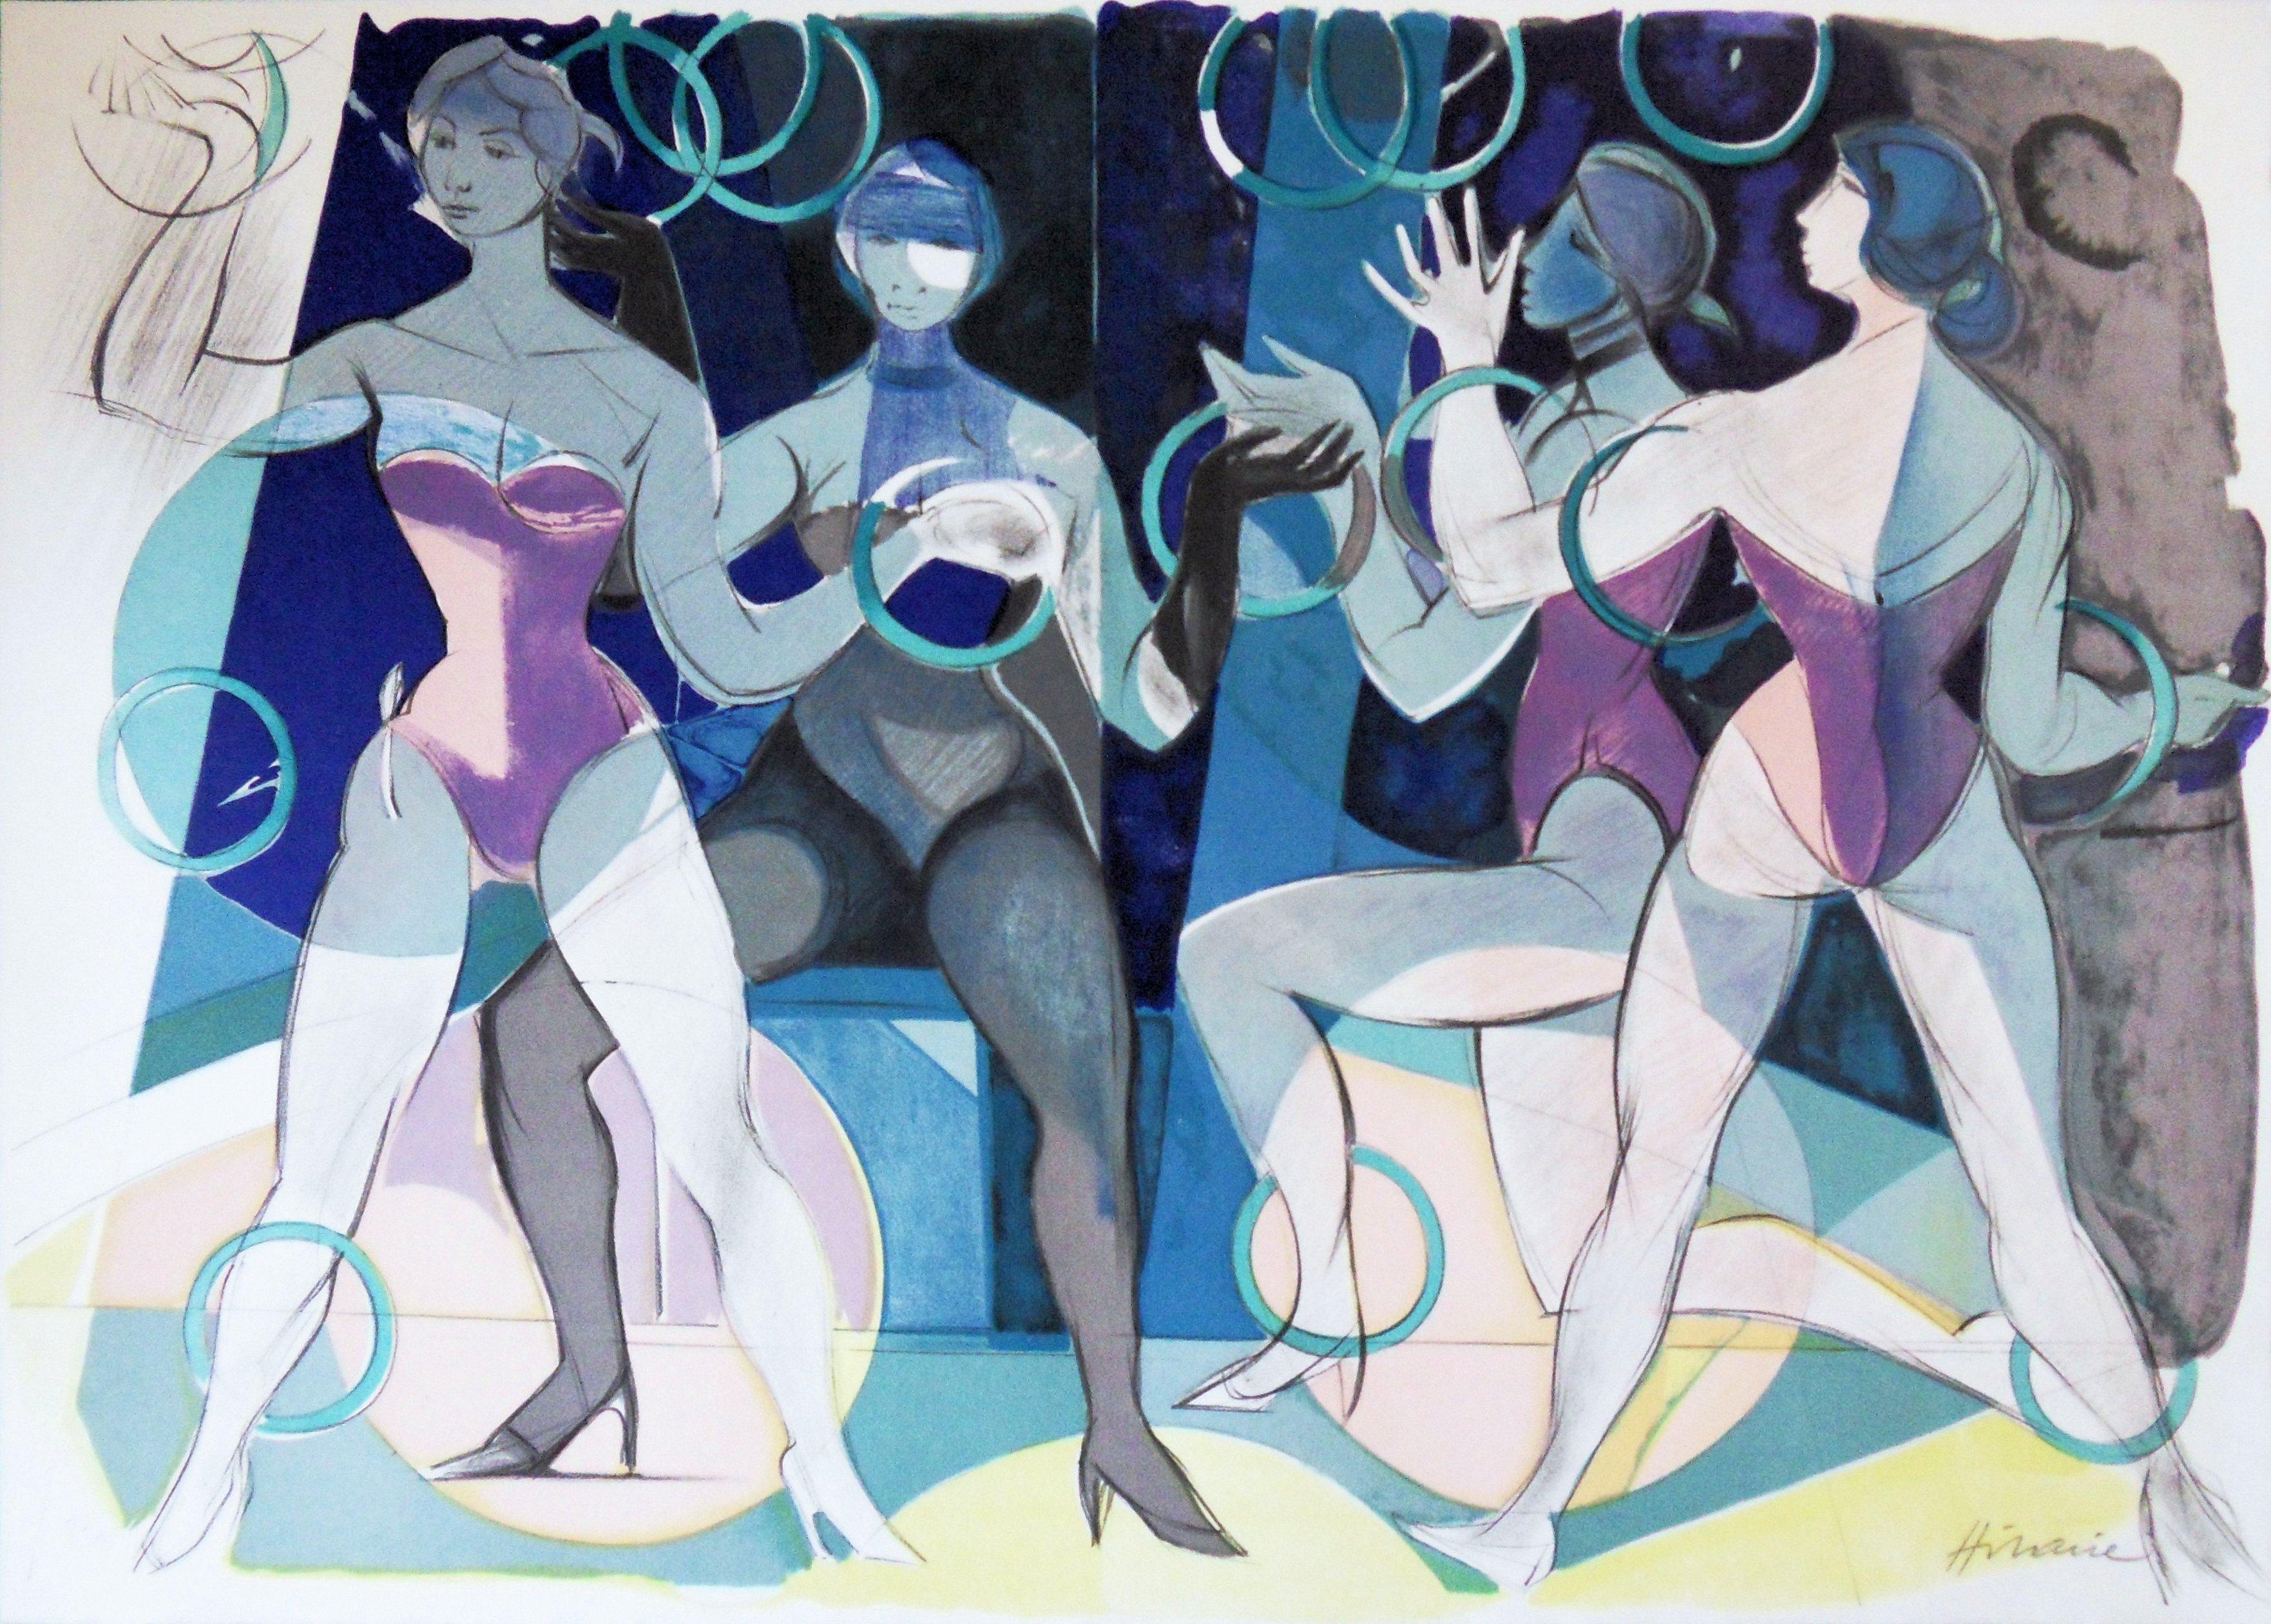 Camille Hilaire Figurative Print - Circus : The Jugglers - Original handsigned lithograph